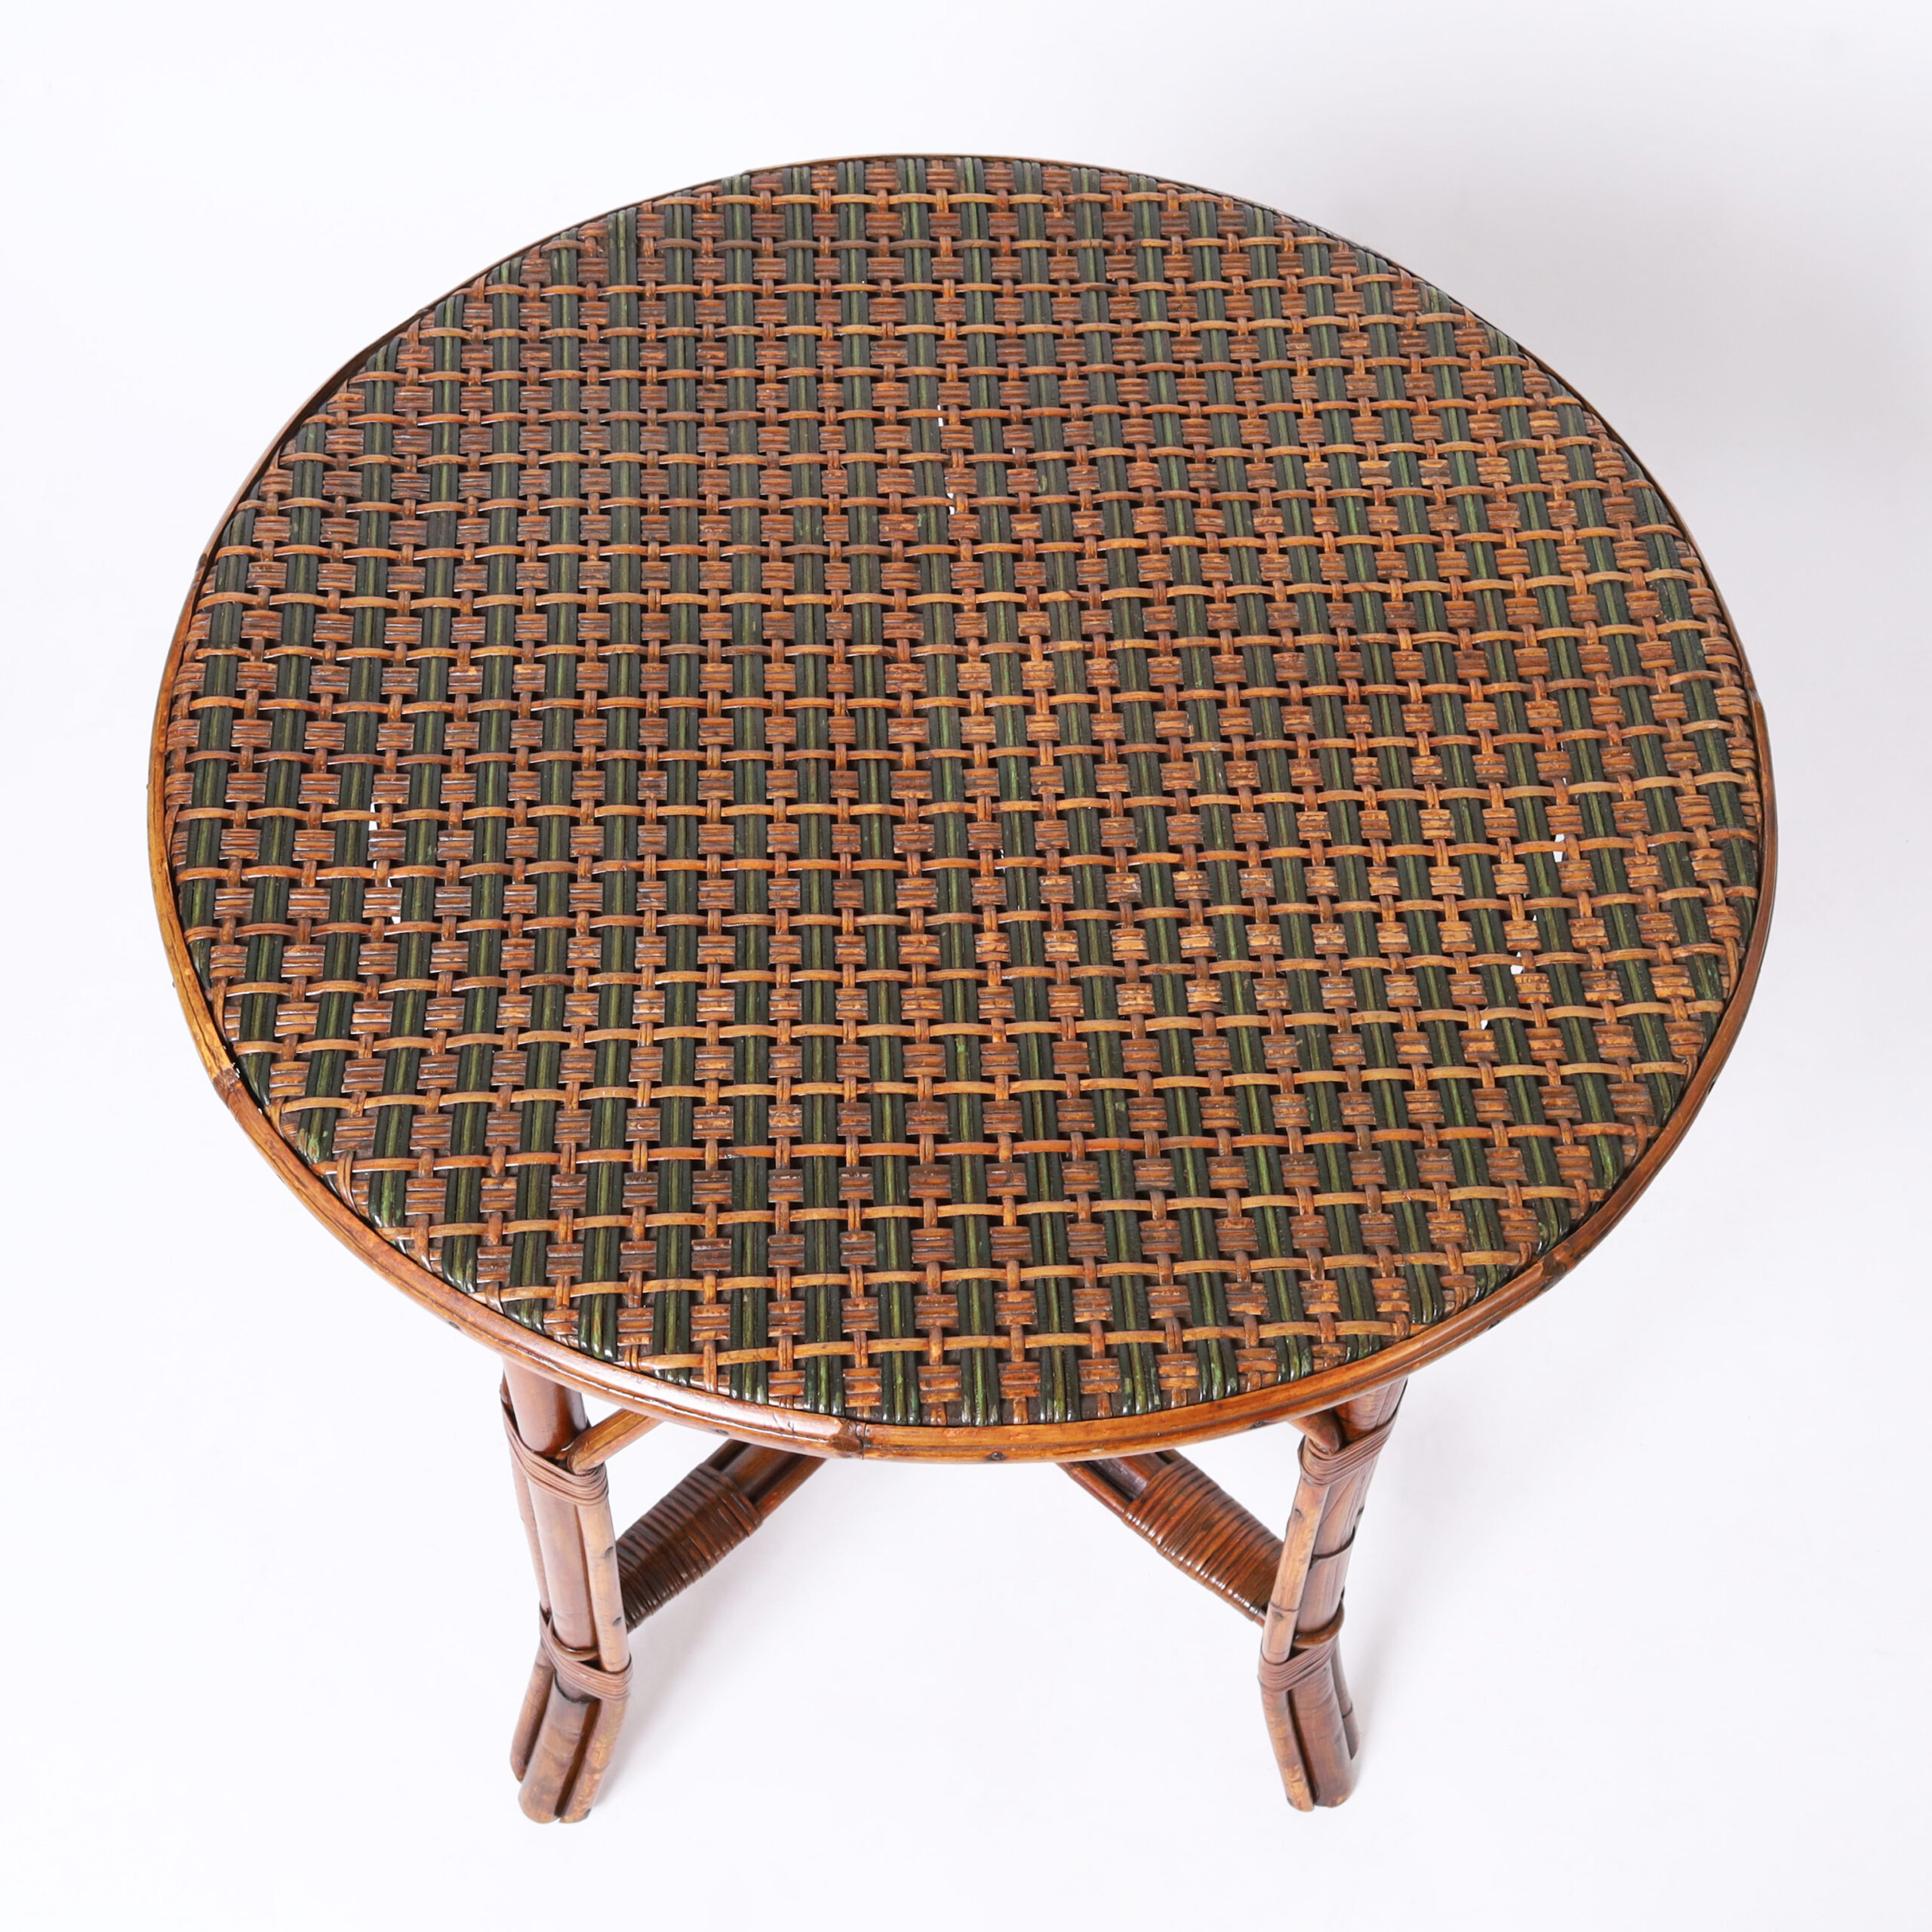 Vintage Bamboo and Rattan French Bistro Table and Chairs